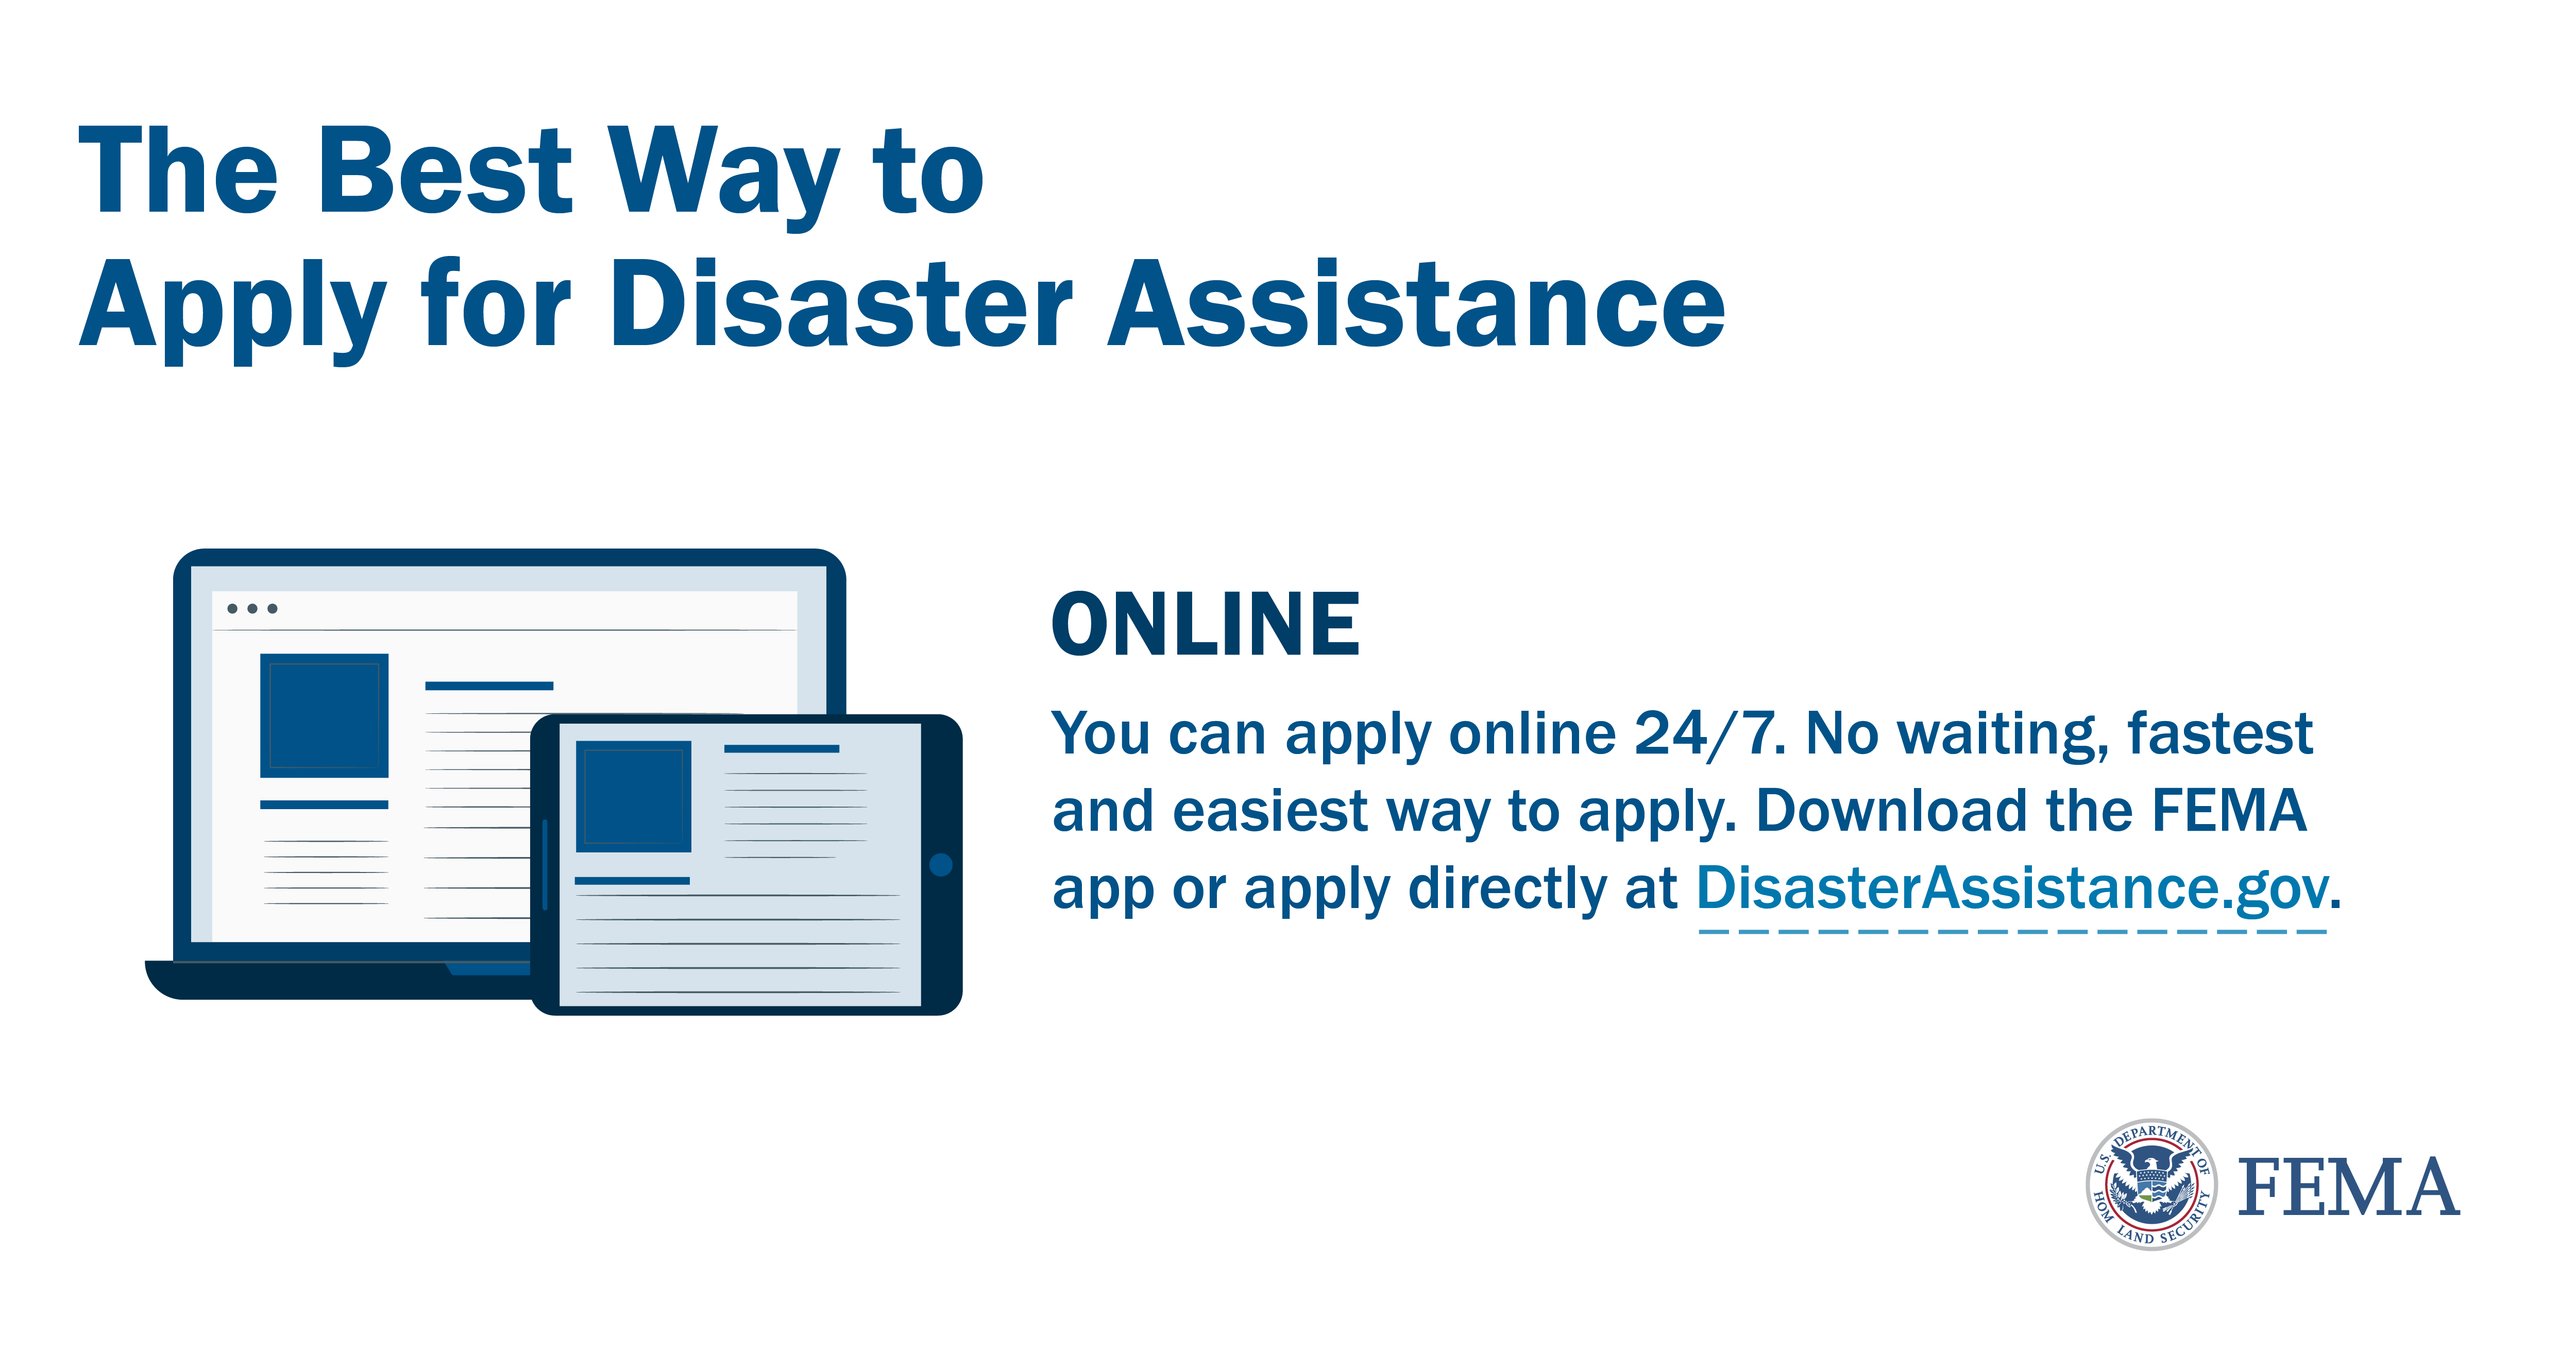 The Best Way to Apply for Disaster Assistance (Online)